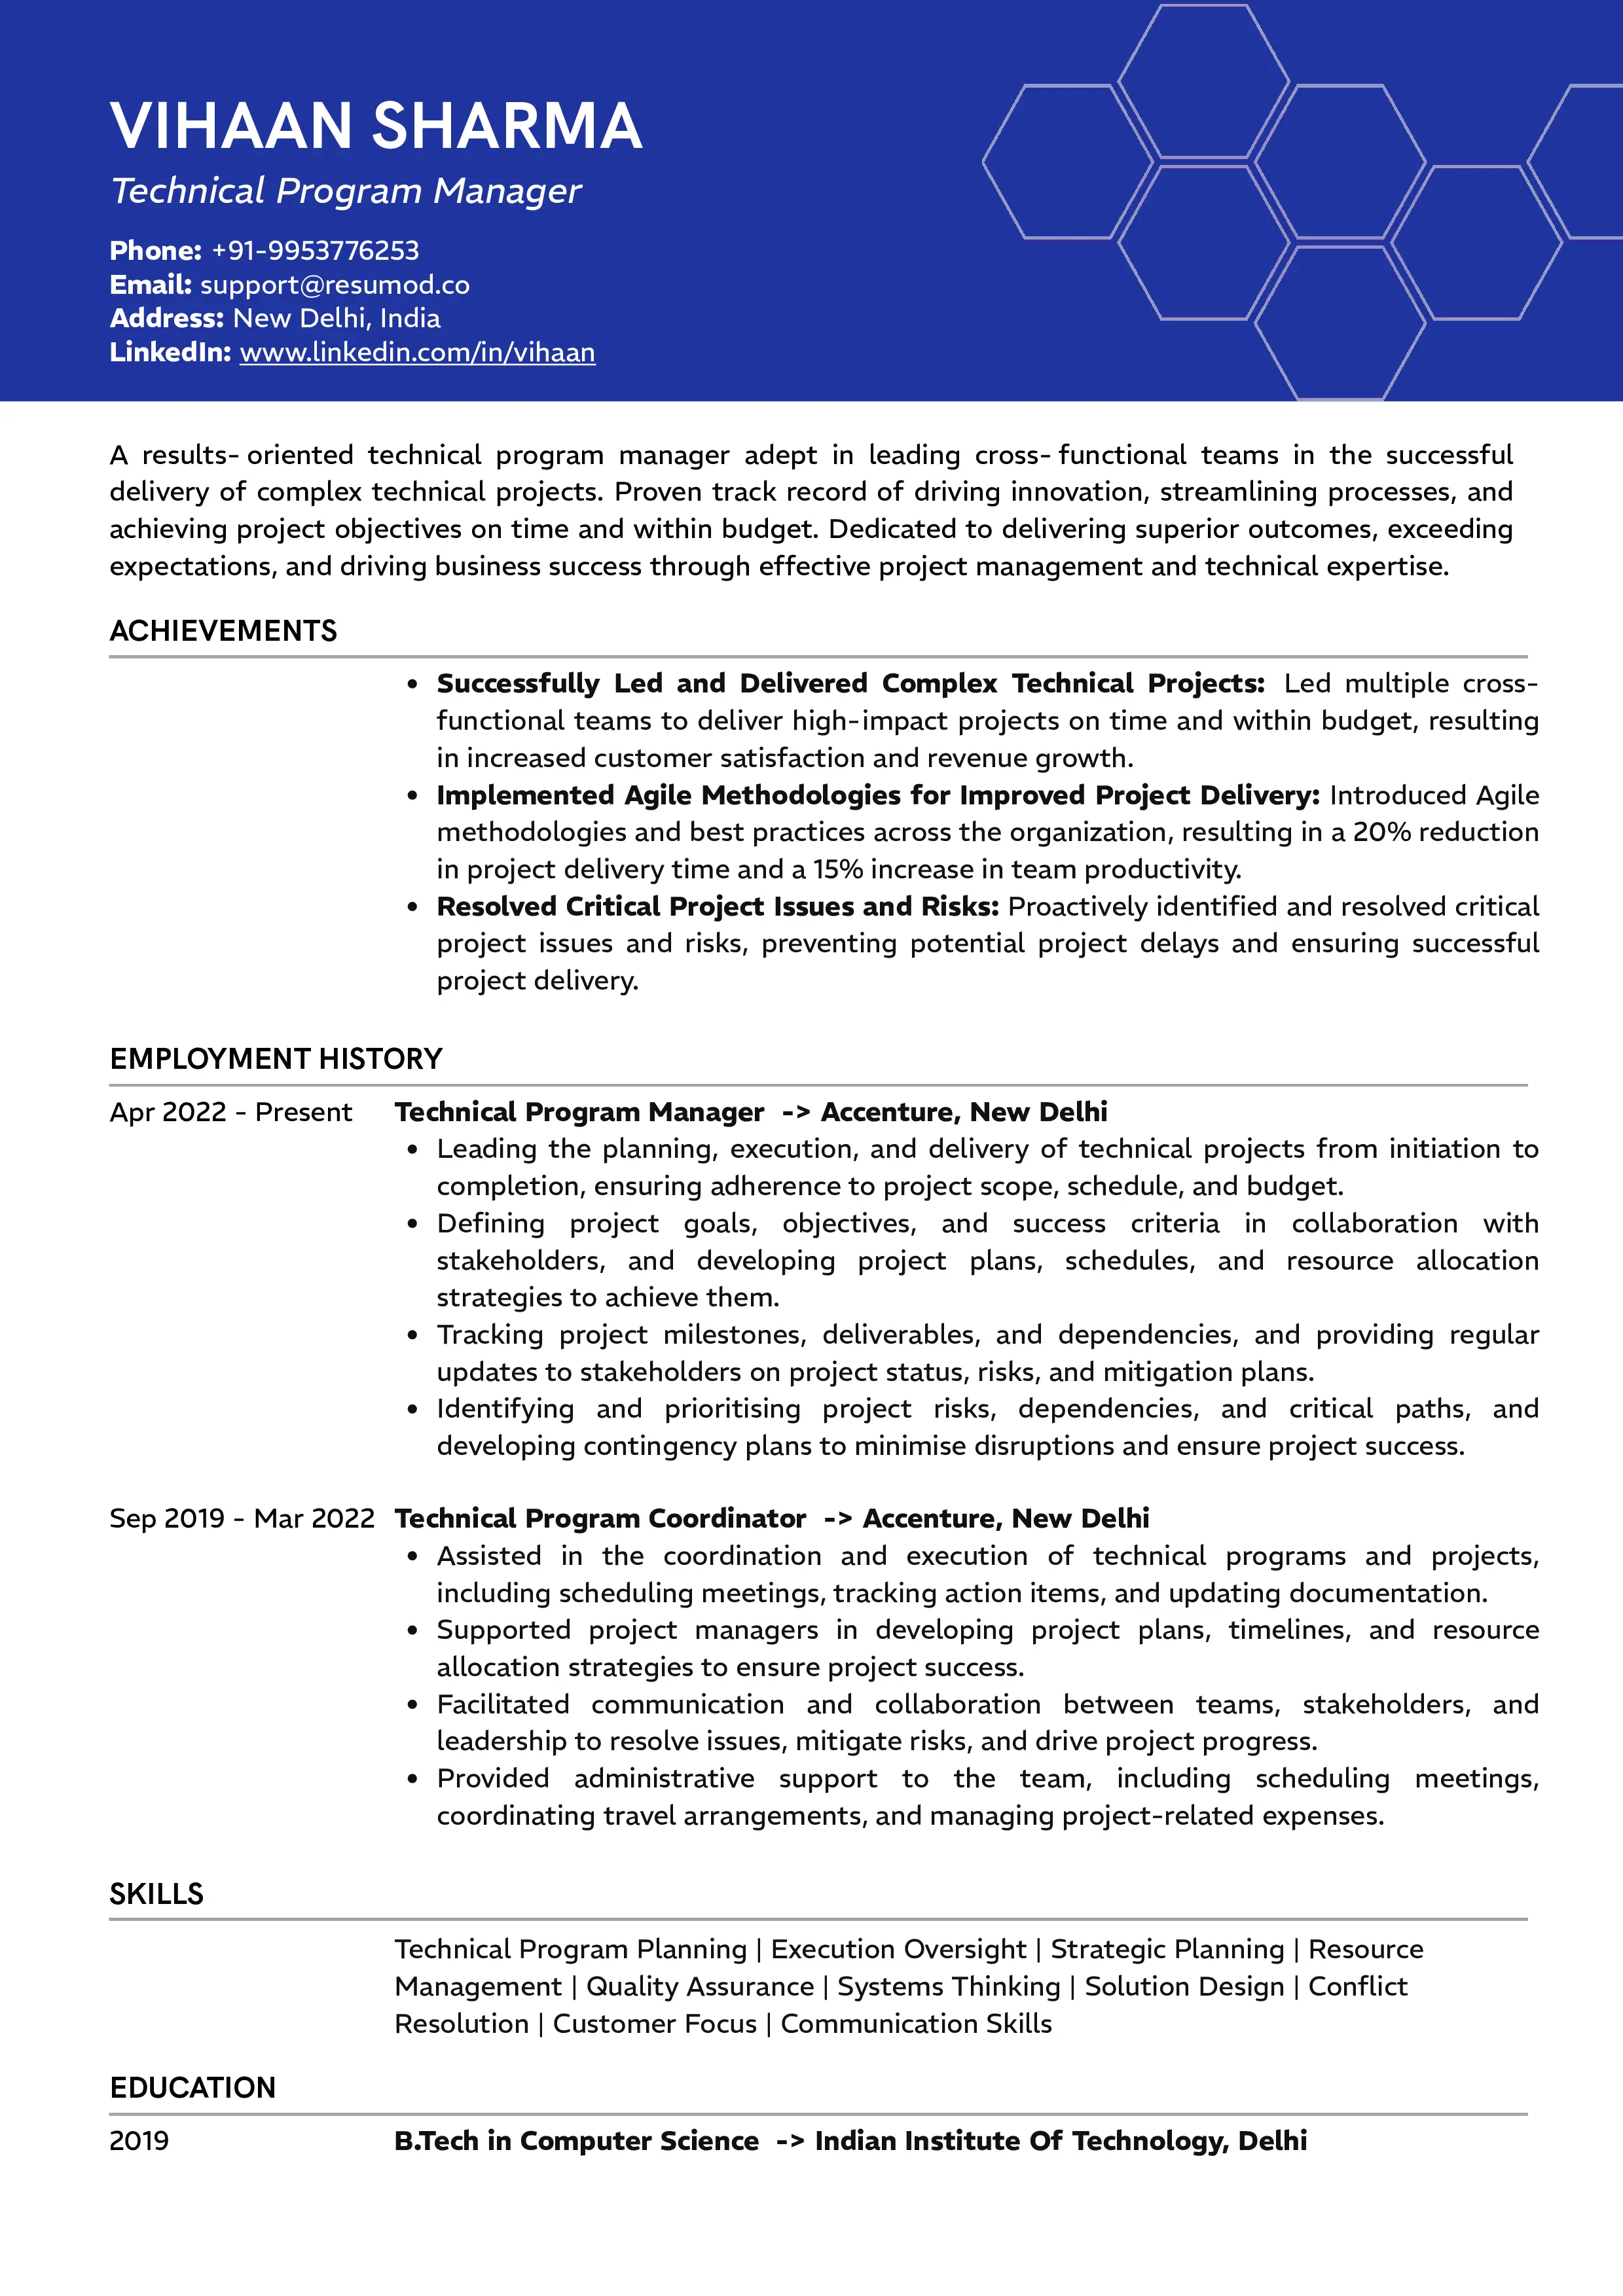 Sample Resume of Technical Program Manager | Free Resume Templates & Samples on Resumod.co